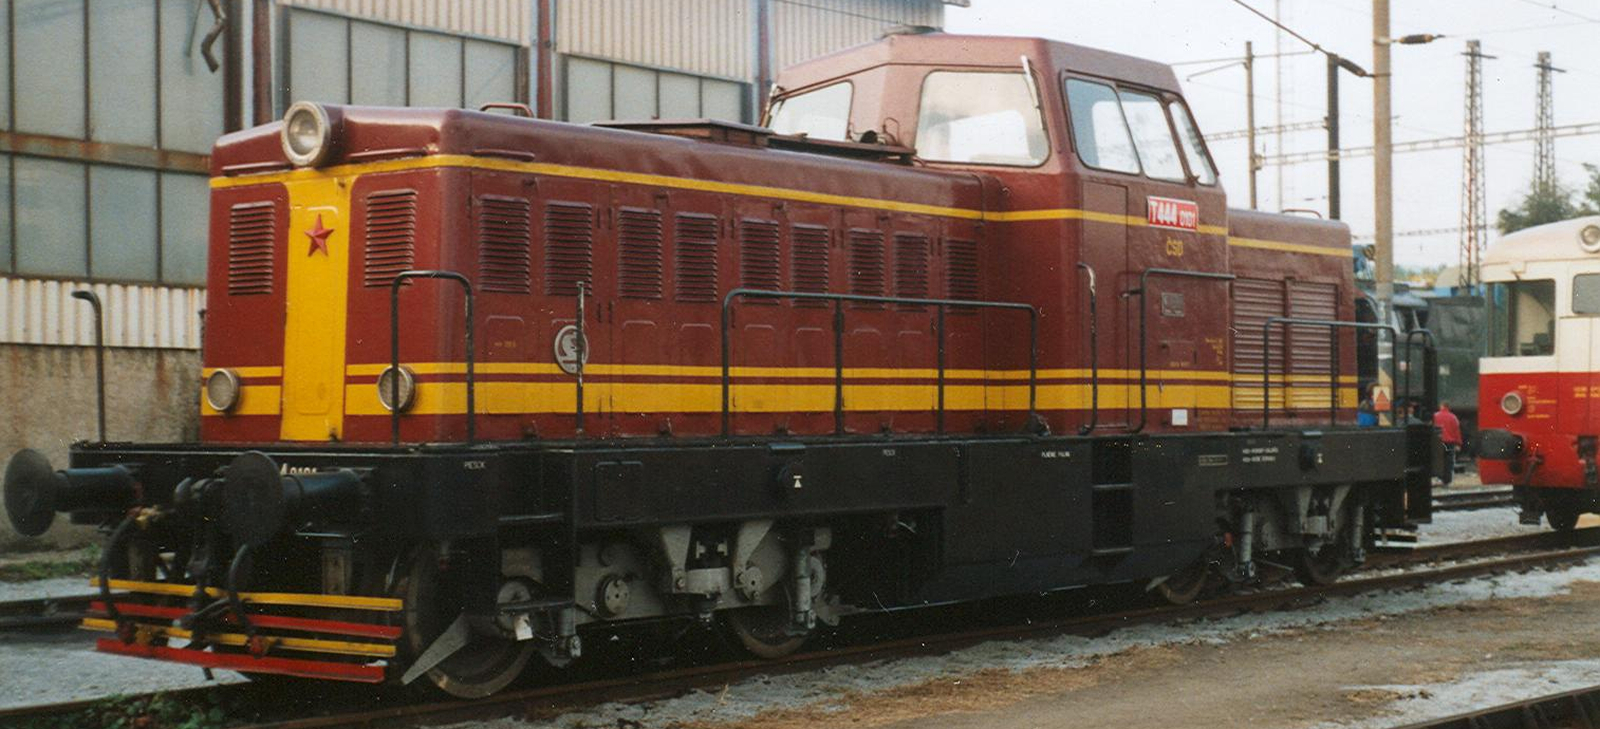 T 444.0101 in 2003 at an exhibition in Ústí nad Labem